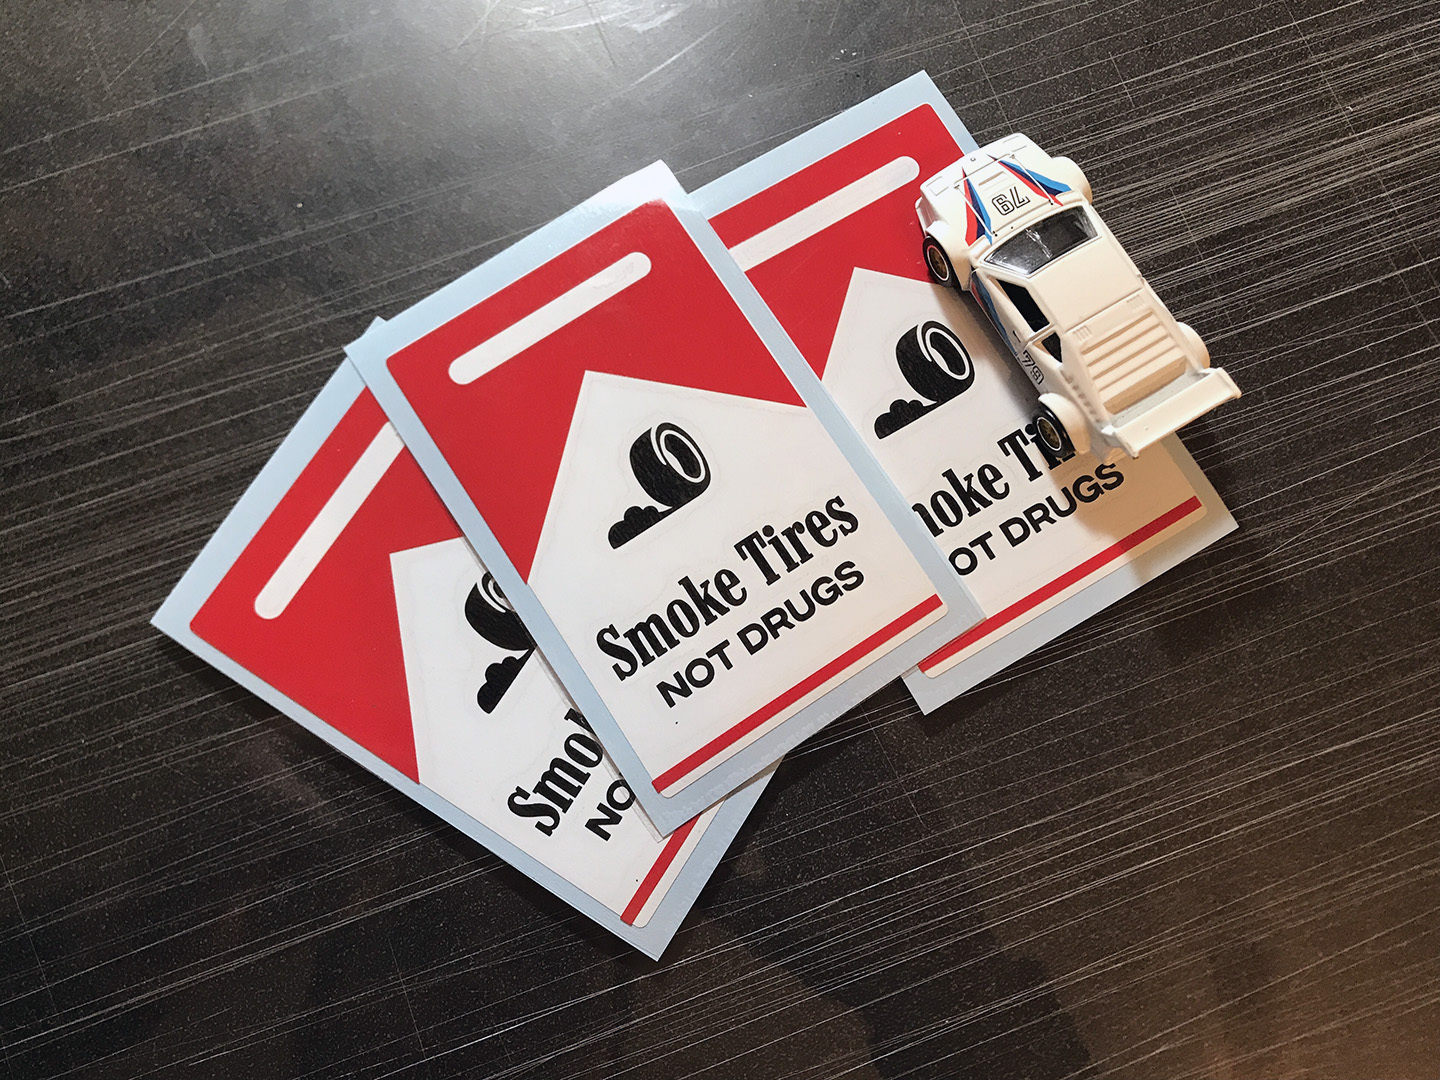 Smoke tires not drugs stickers buy now